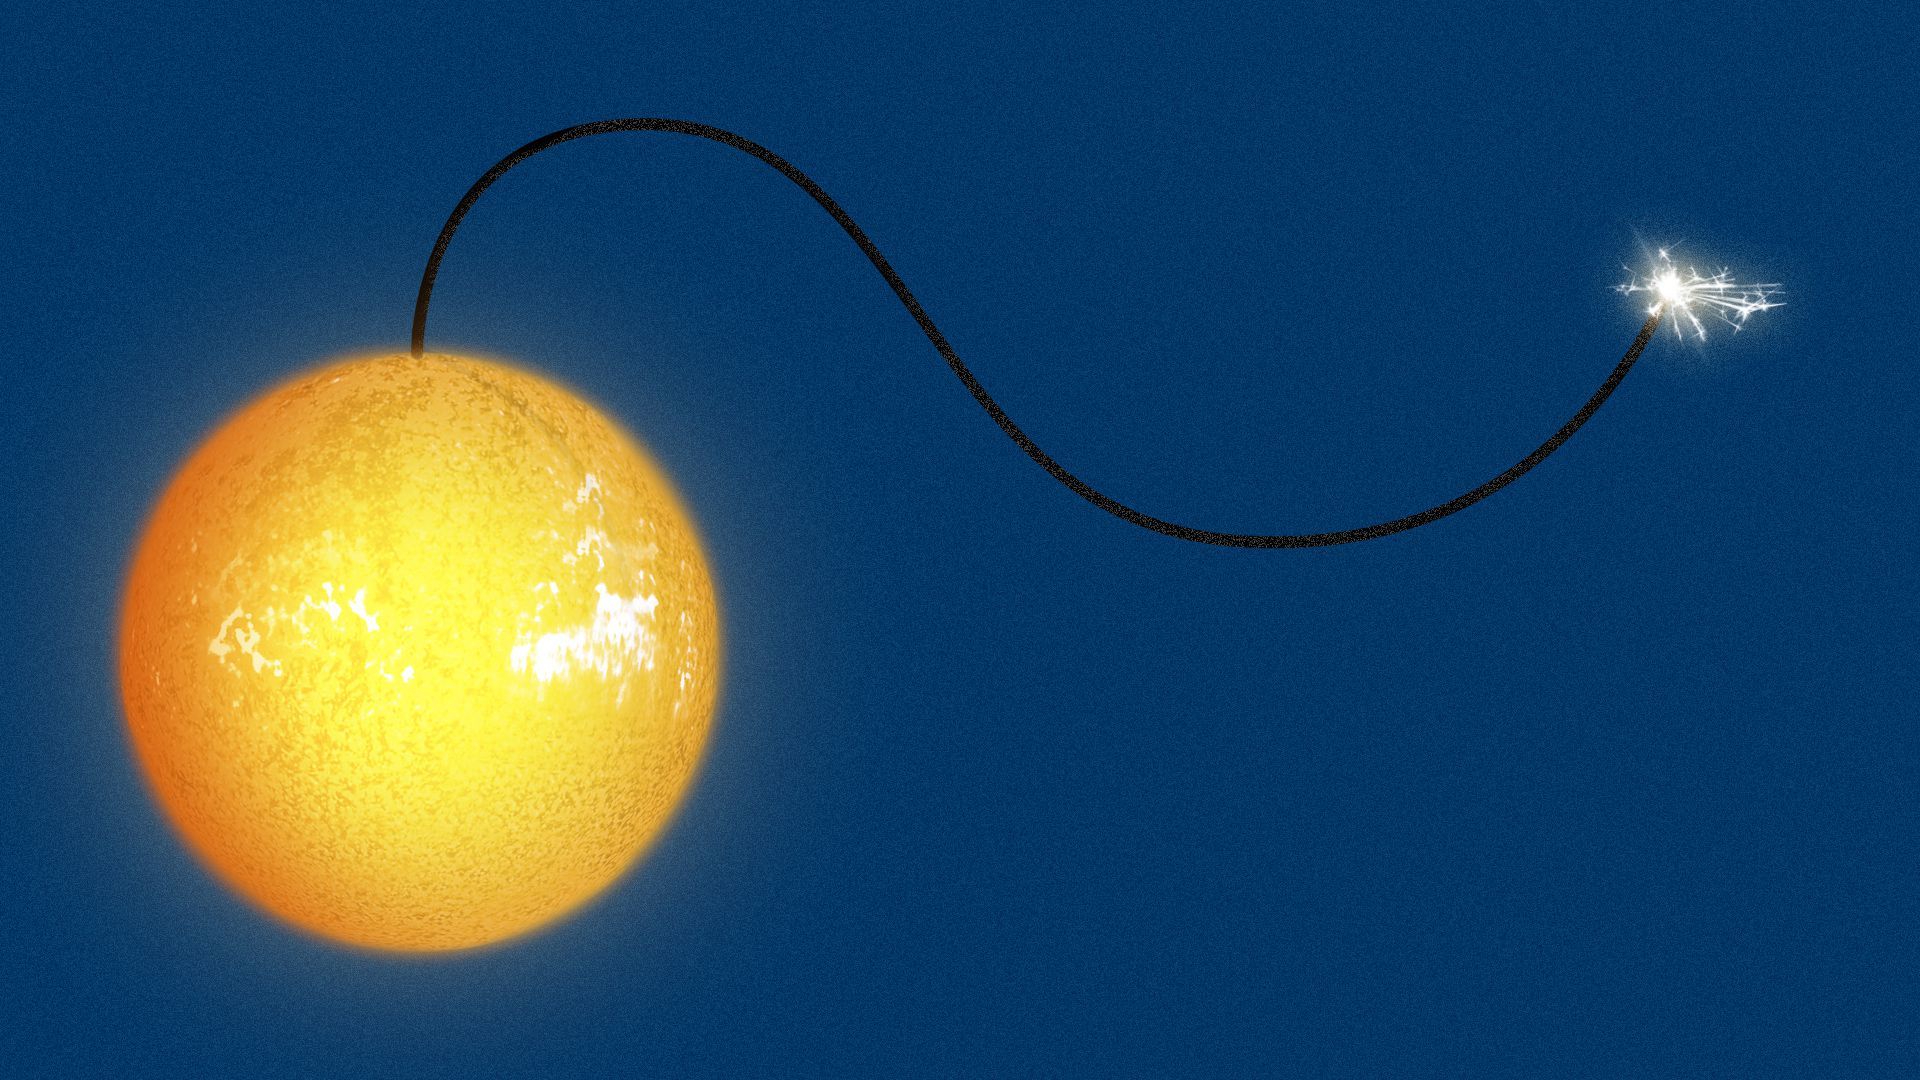 Illustration of the sun as a bomb with an extra long lit fuse.  